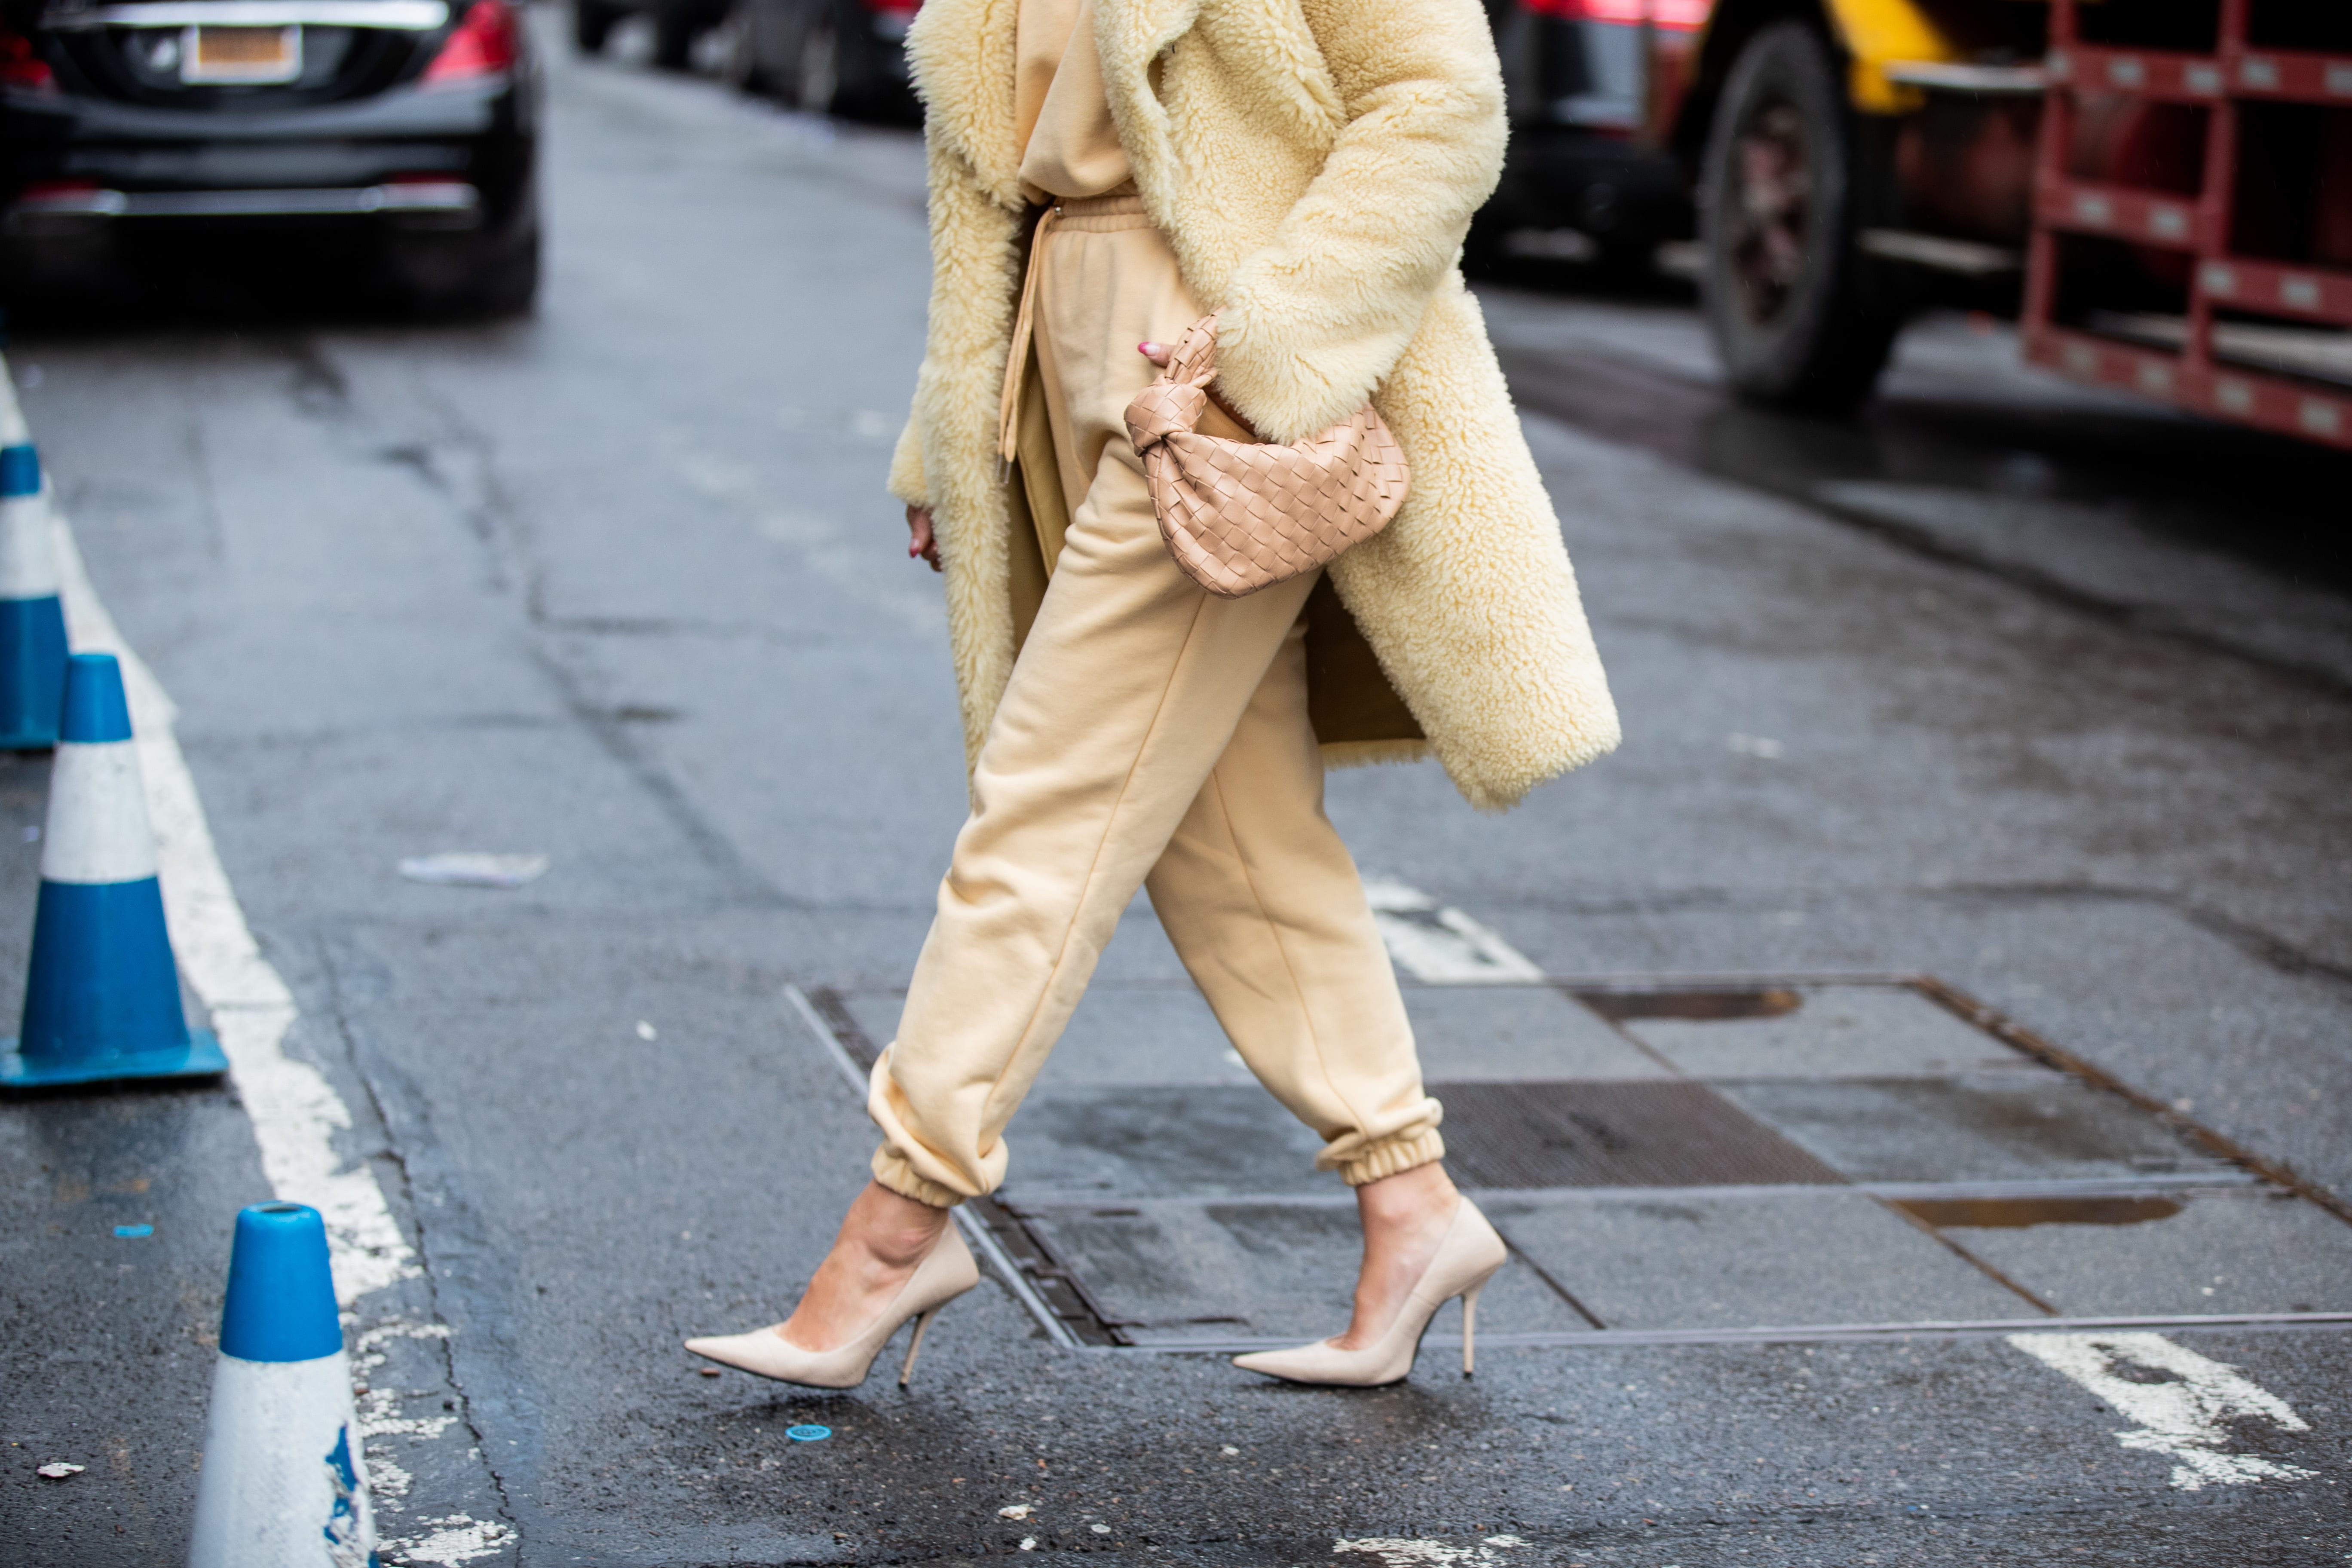 NEW YORK, NEW YORK - FEBRUARY 11: Tiffany Hsu is seen wearing yellow coat, beige pants and jumper, Bottega bag outside Gabriela Hearst during New York Fashion Week Fall / Winter on February 11, 2020 in New York City. (Photo by Christian Vierig/Getty Images)